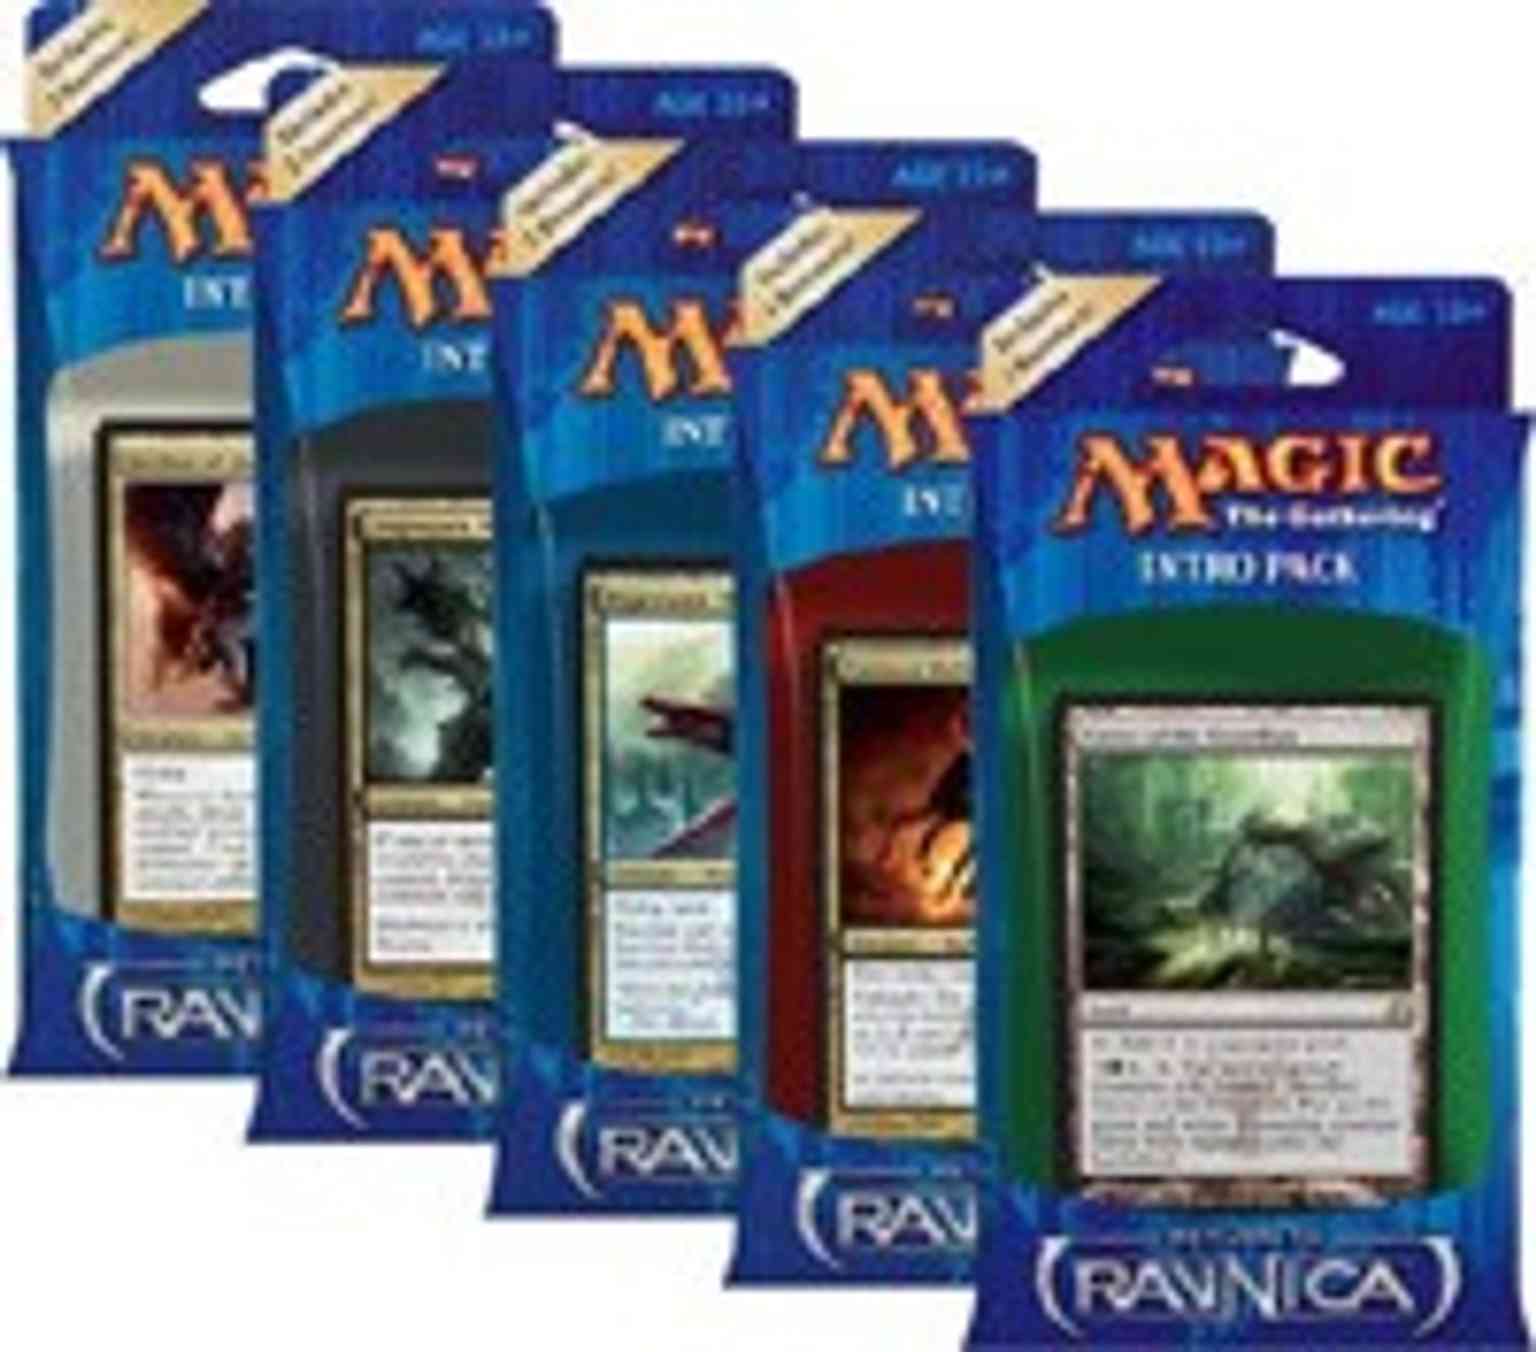 Return to Ravnica - All 5 Intro Packs magic card front